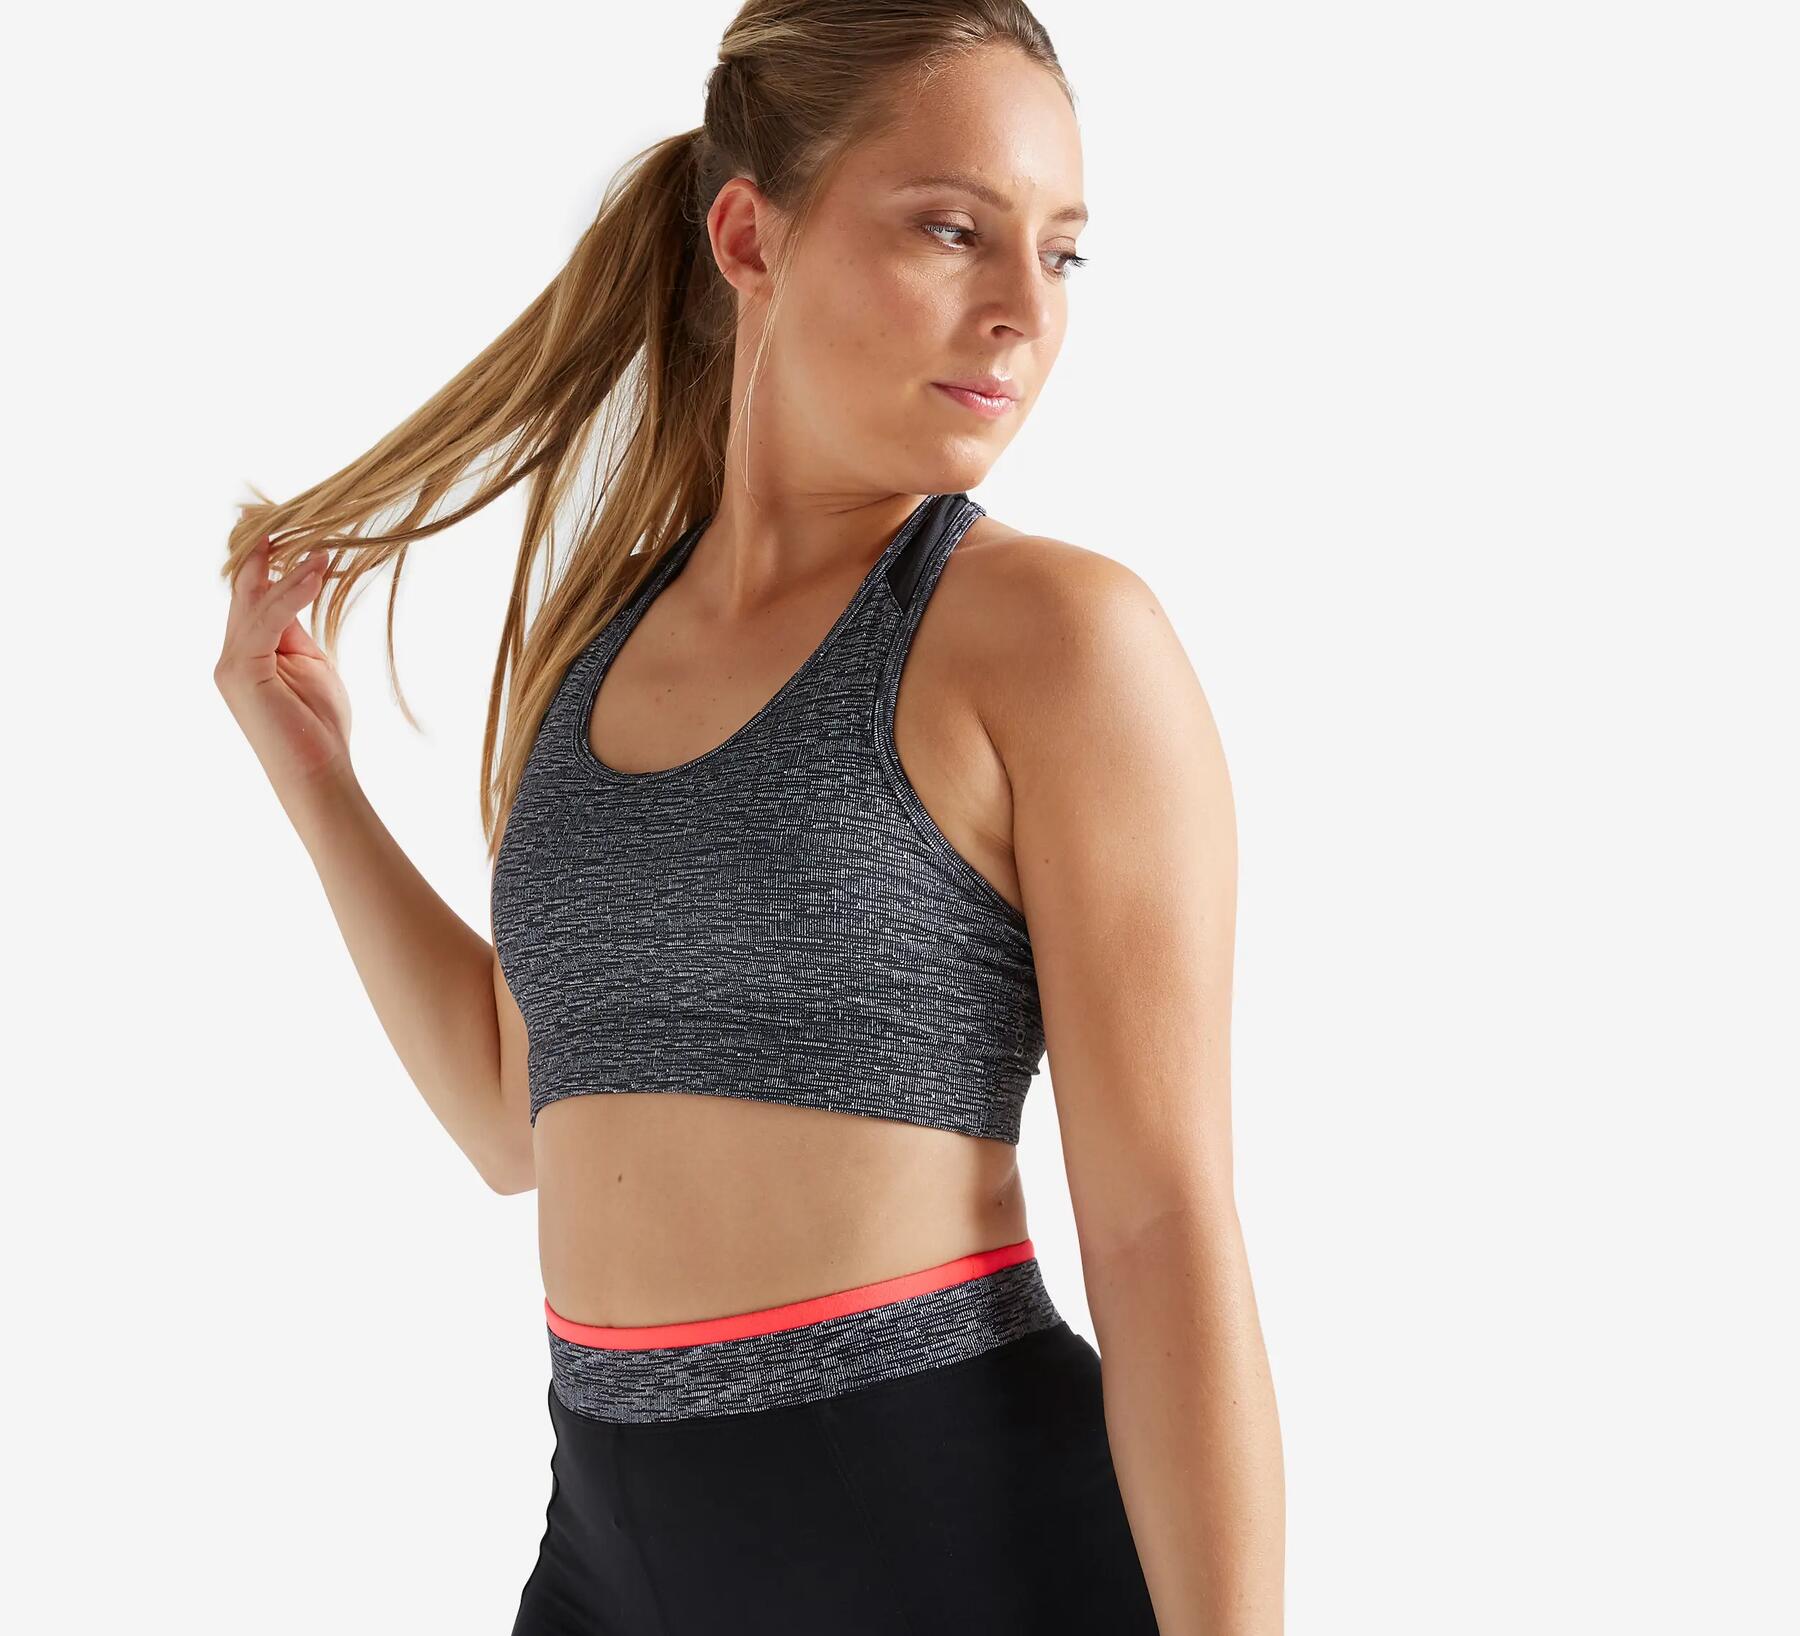 How to choose the right sports bra